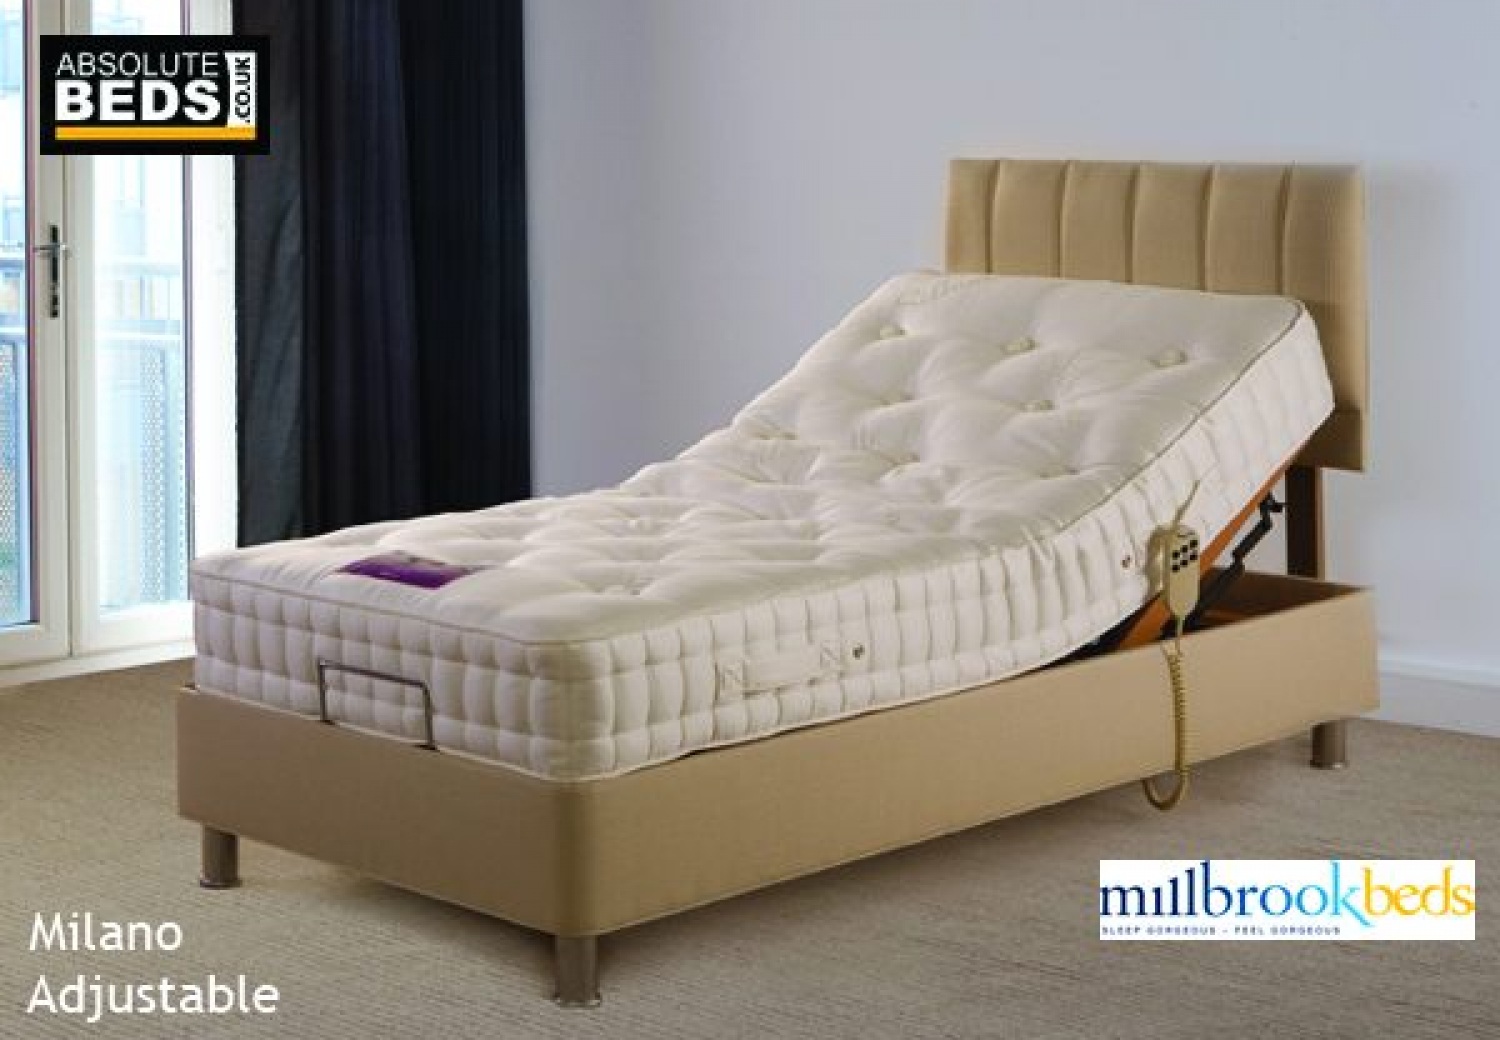 millbrook milano electric adjustable bed, Beds and mattresses to suit every budgets. With a brand new Beds and mattresses, turn your bedroom to sleep sanctuary. image